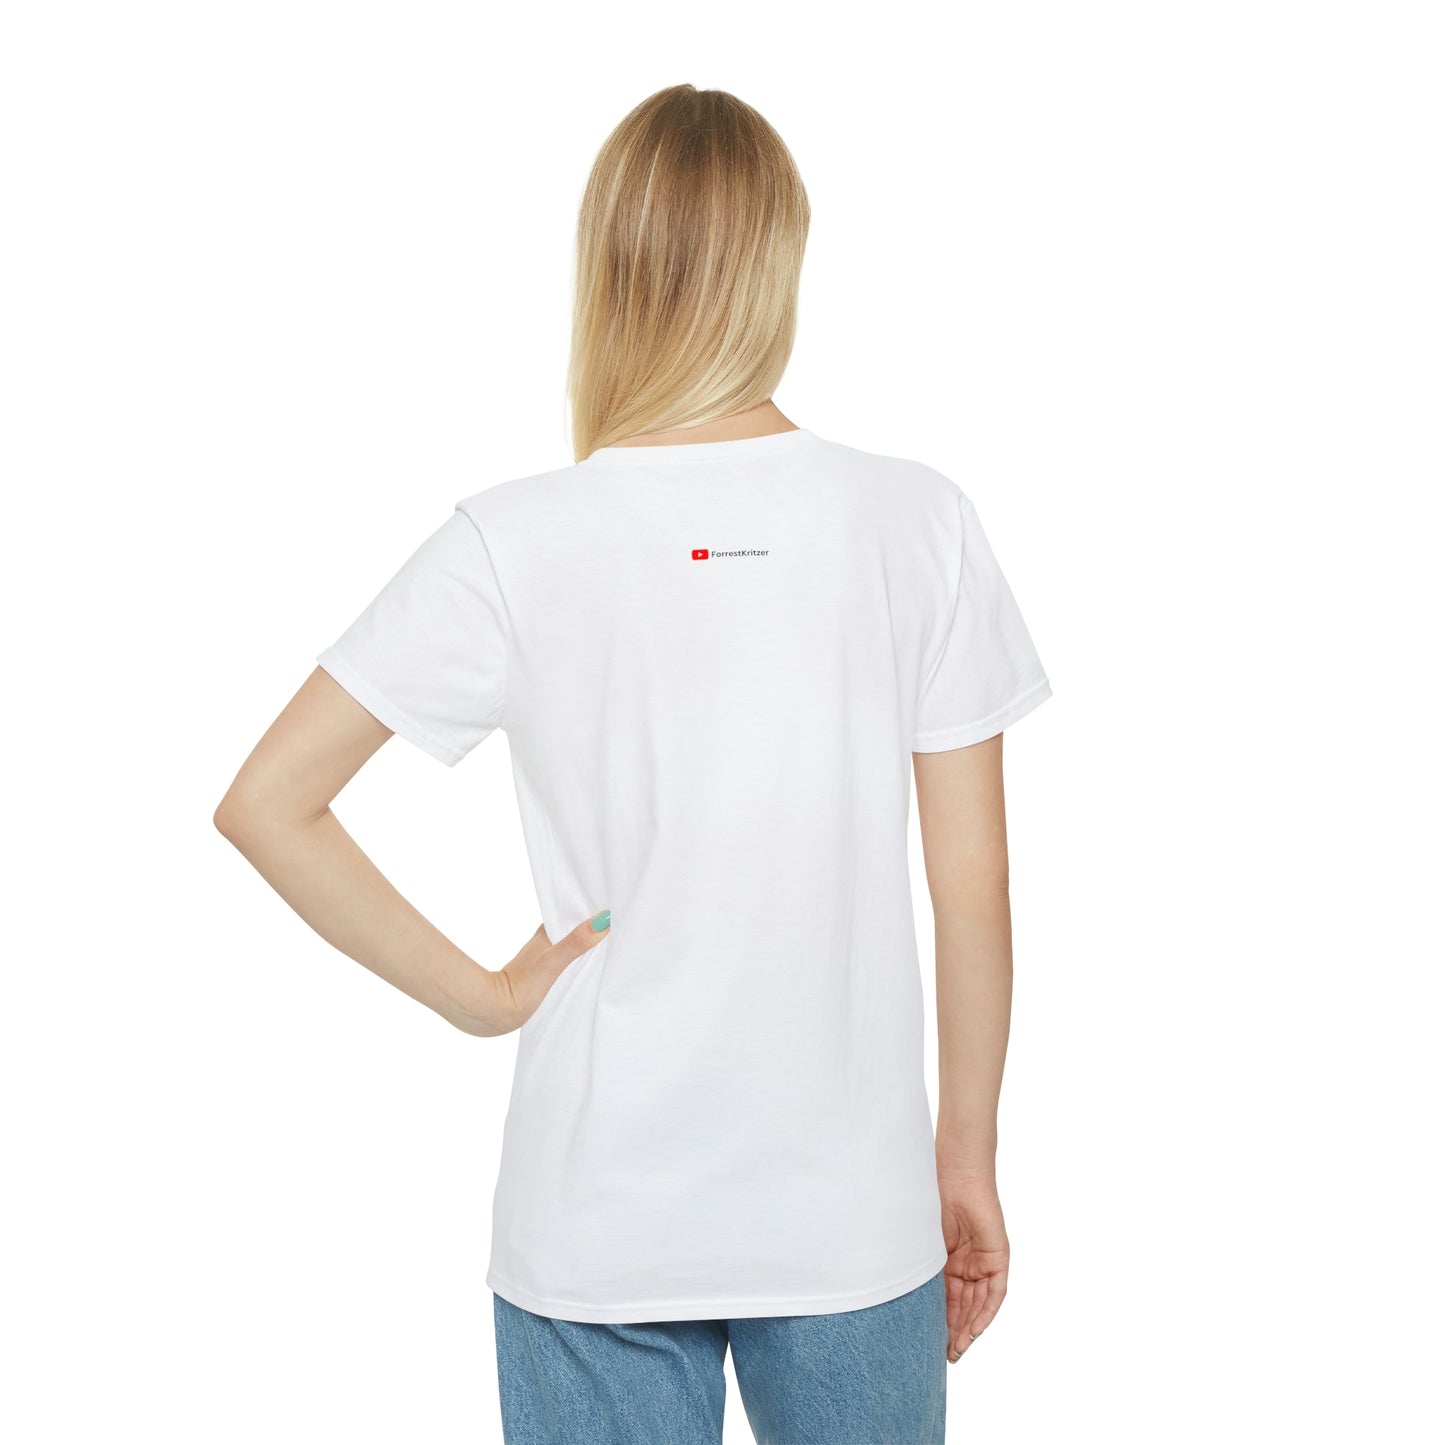 The Bowling Stones T-Shirt